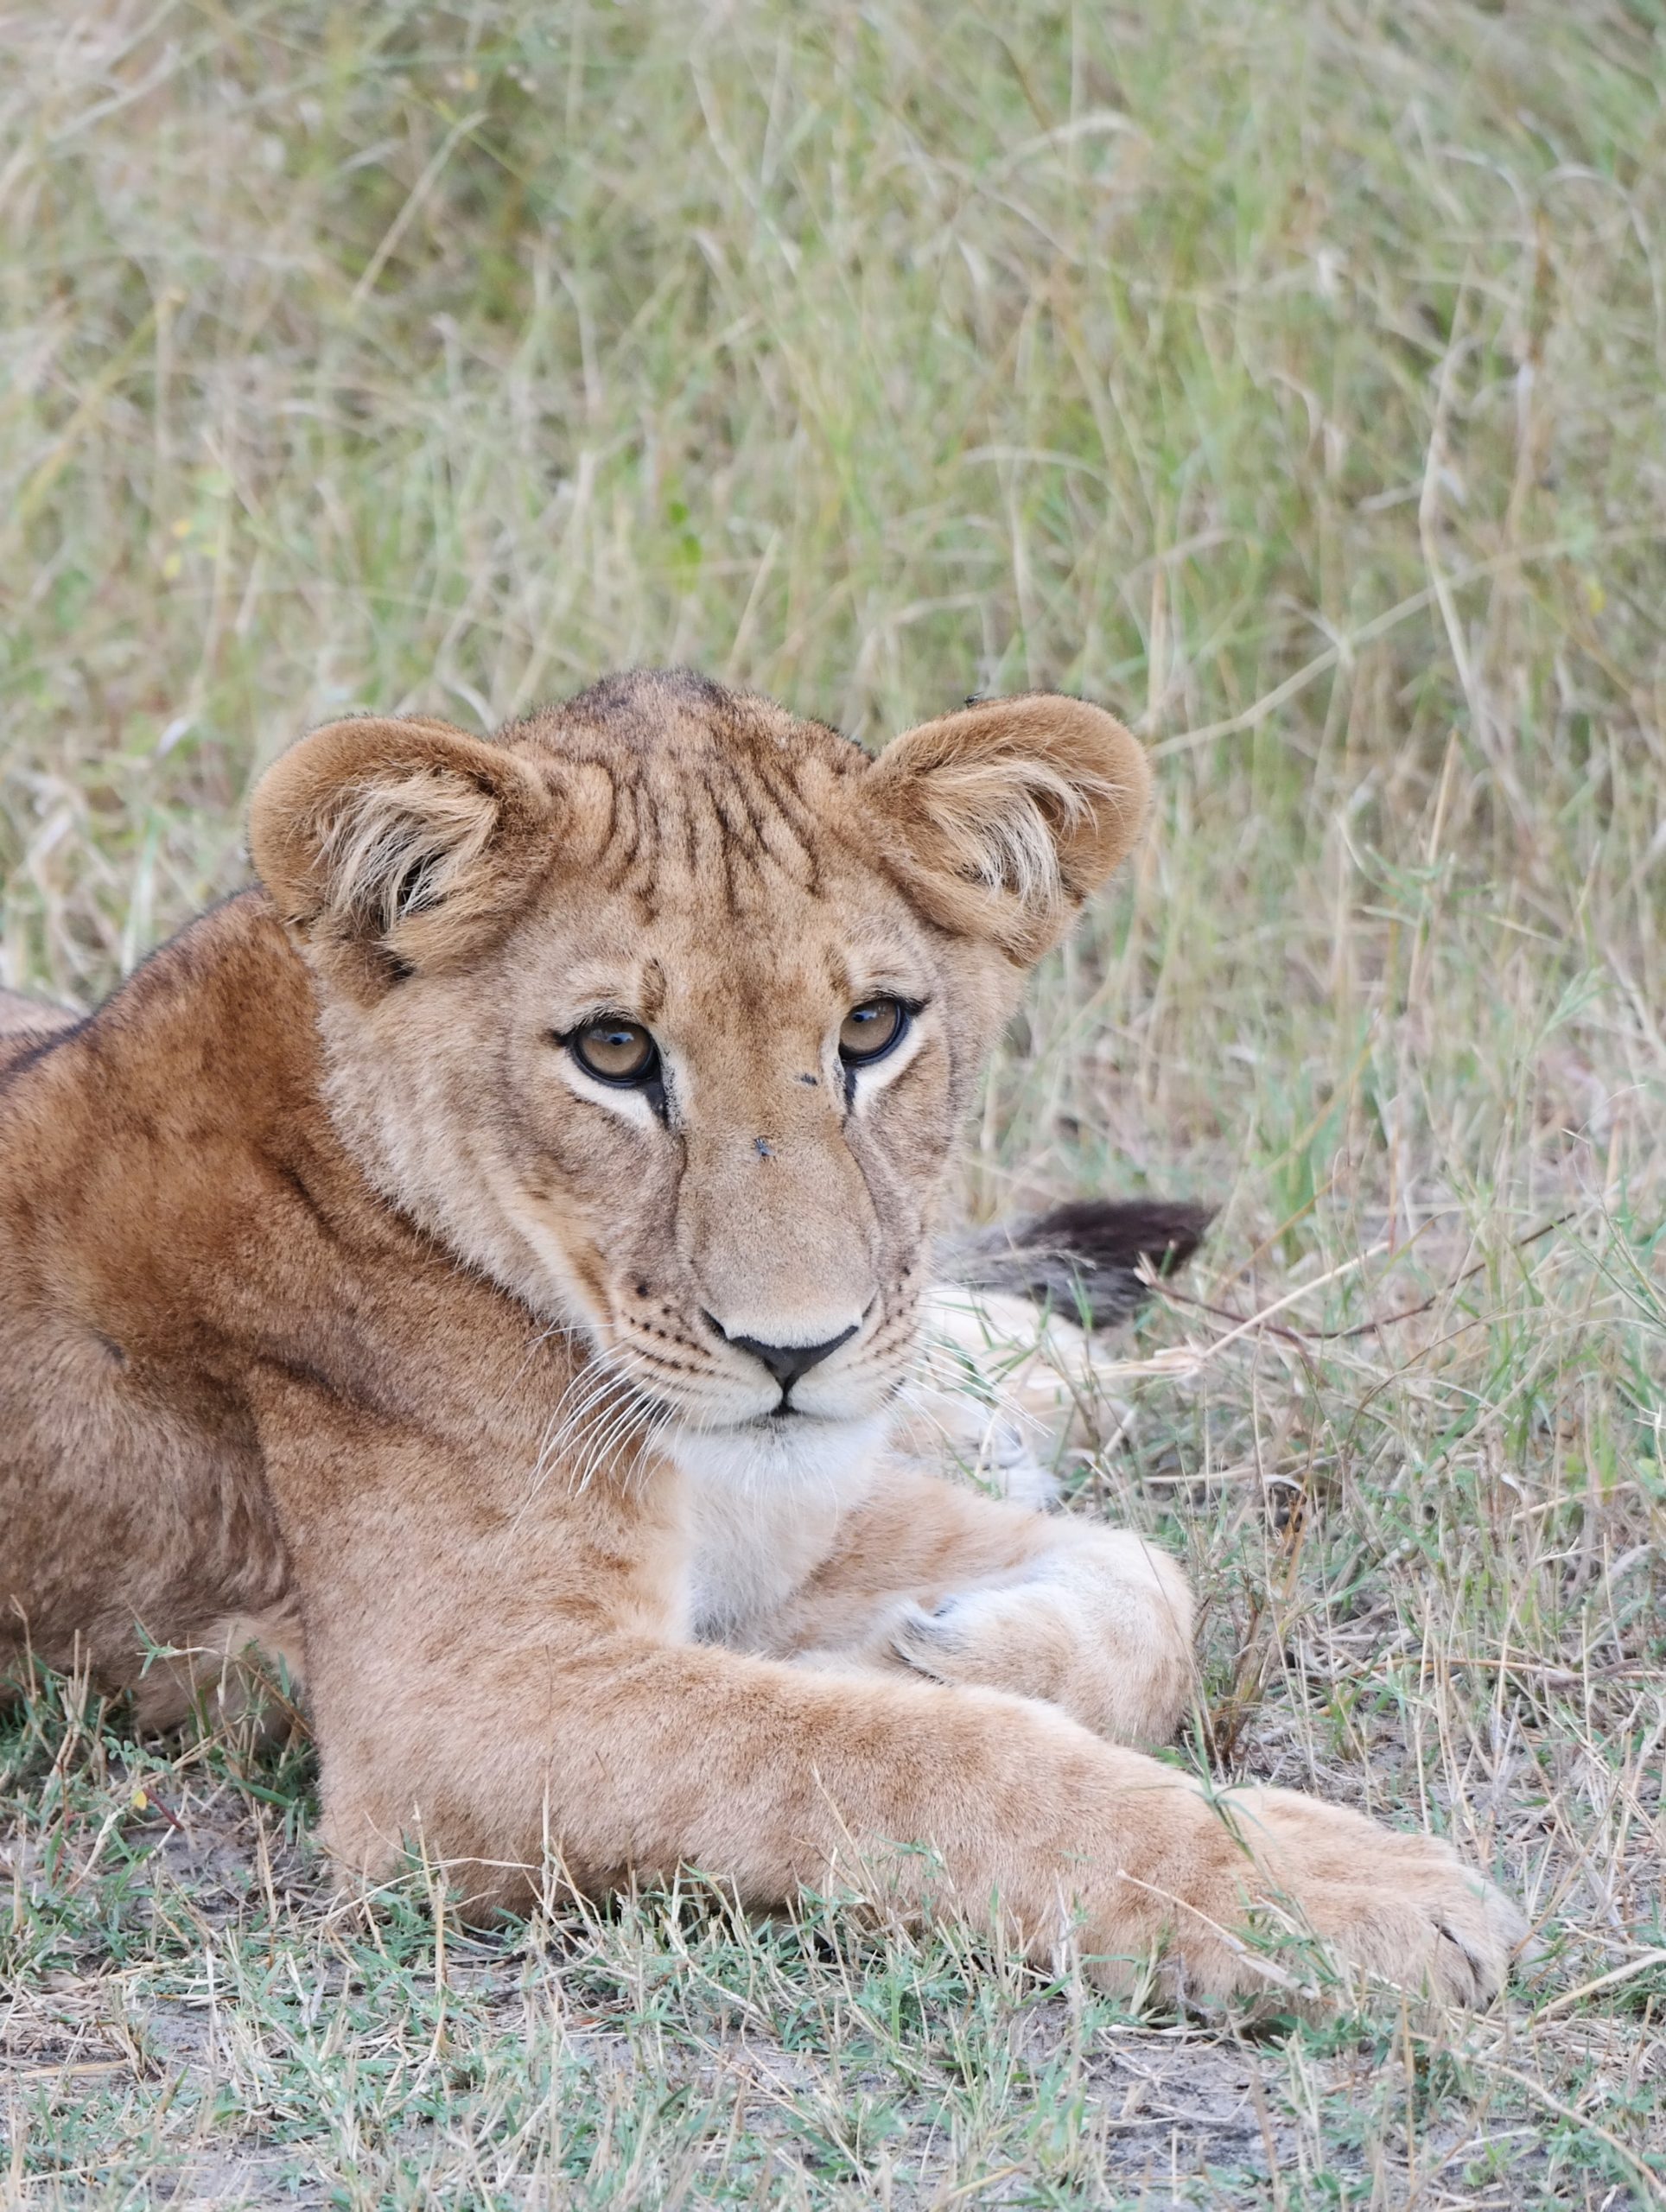 A lion cub sit in the grass in Botswana